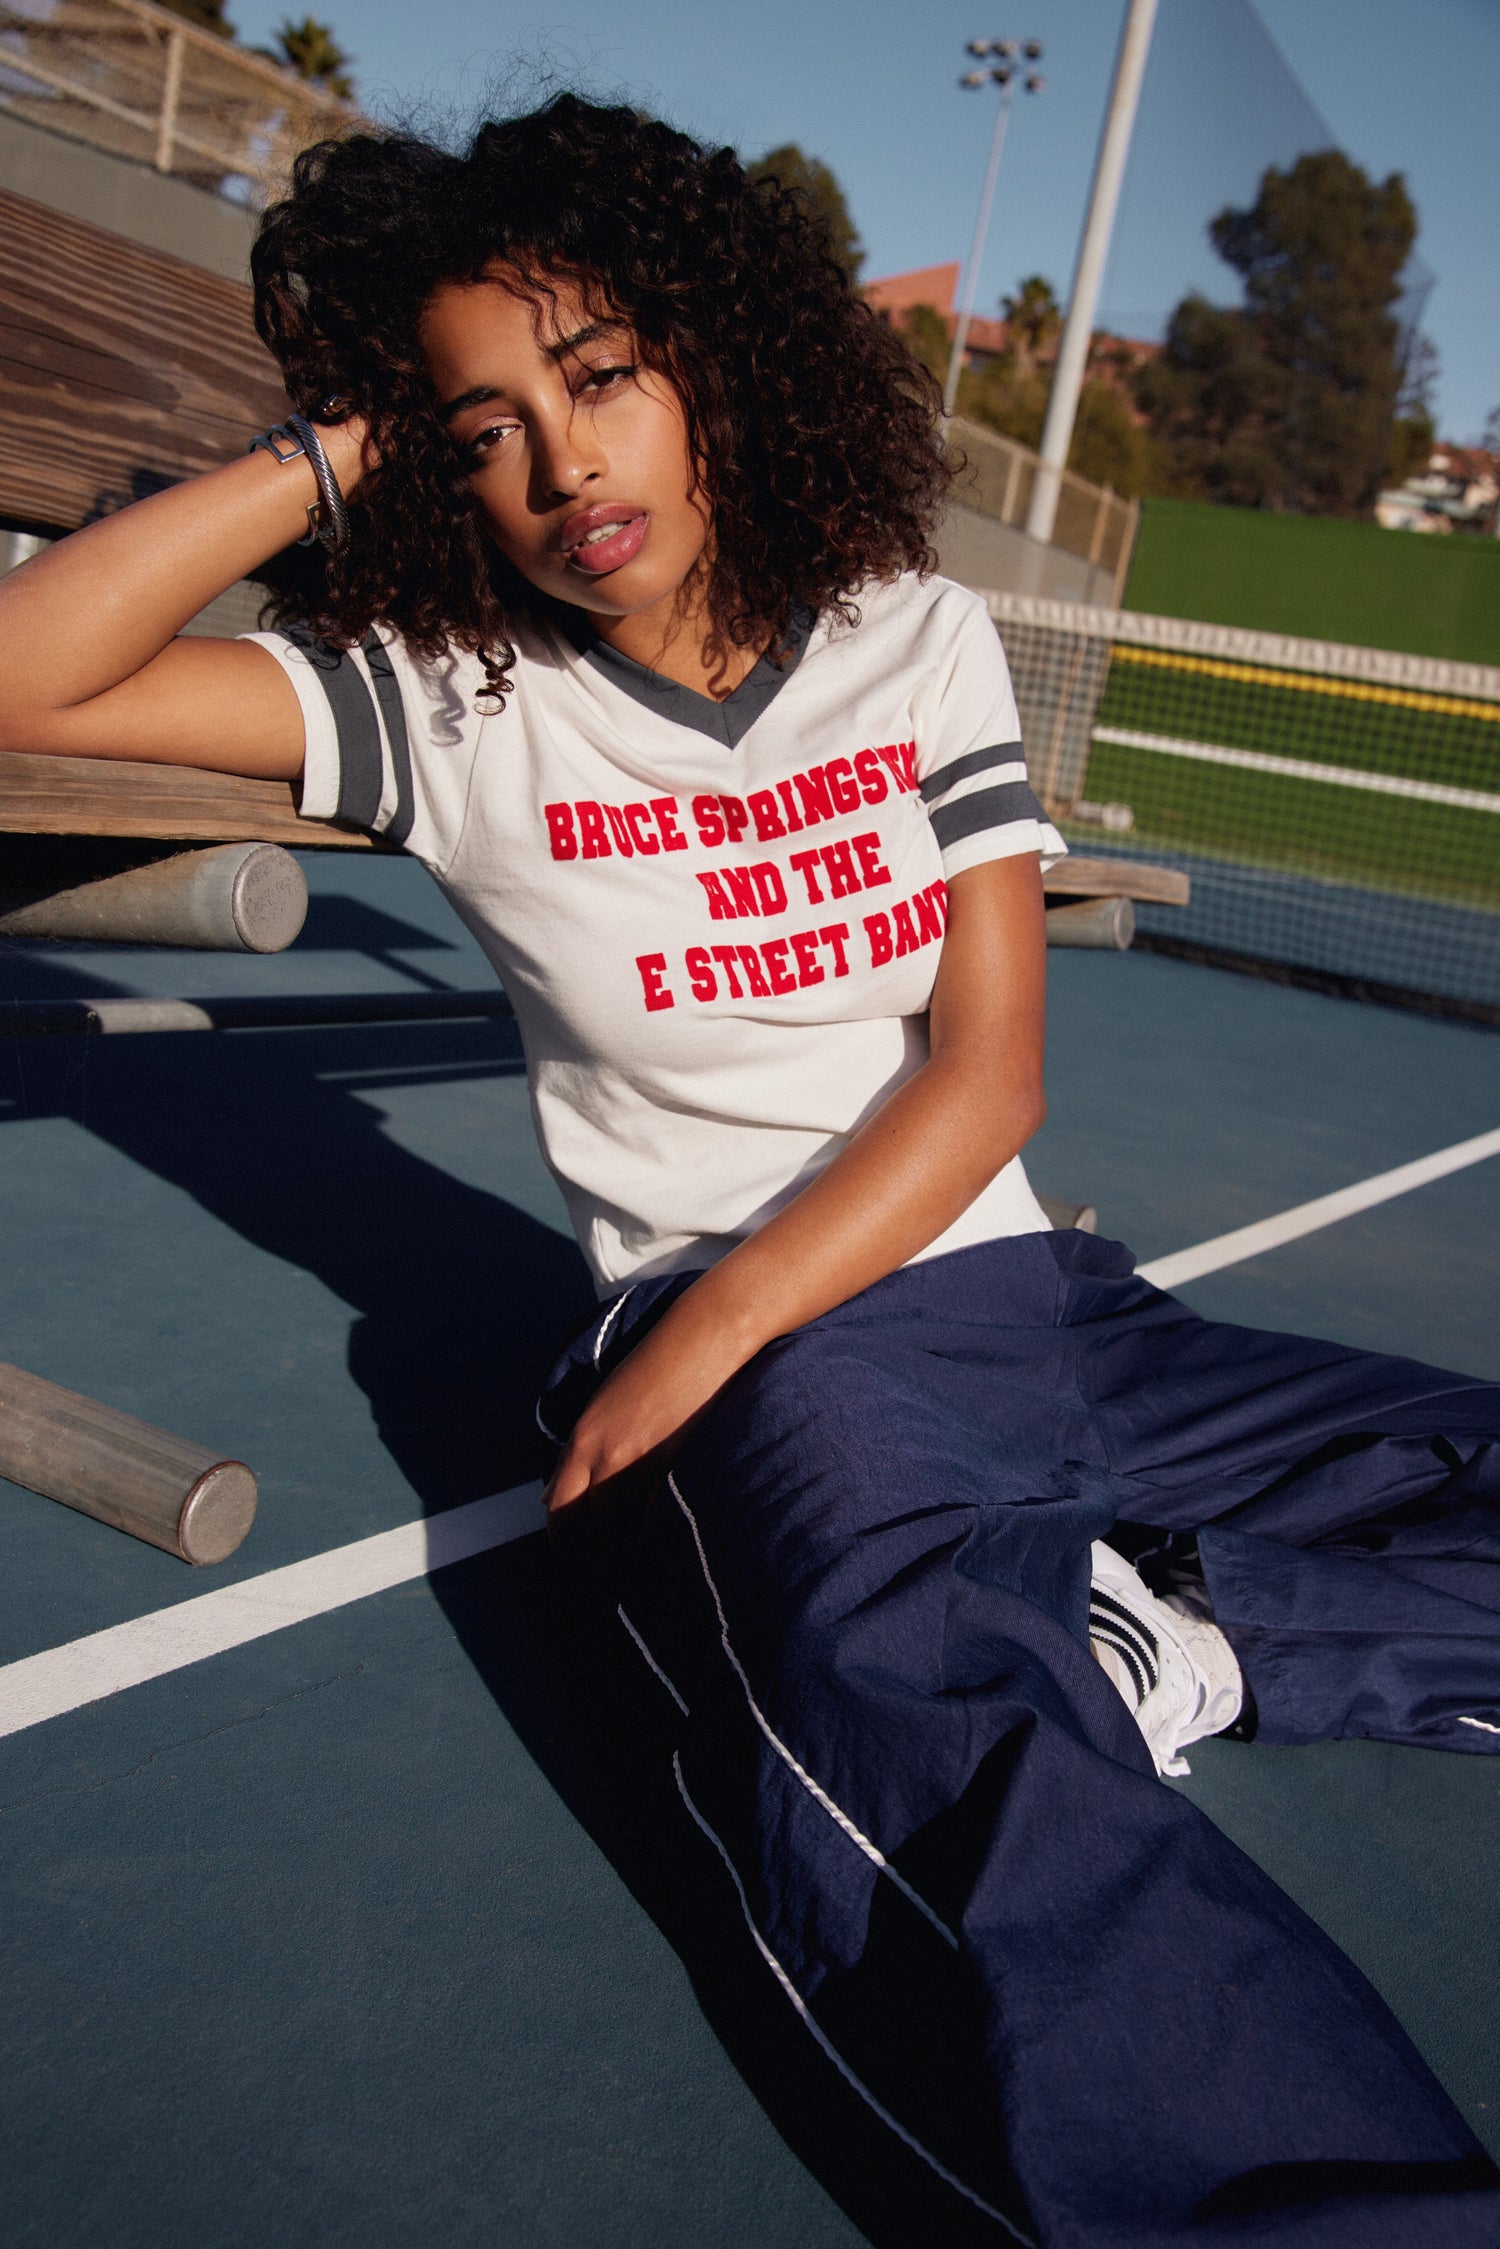 A model featuring a white sporty tee with black stripes on the sleeves.